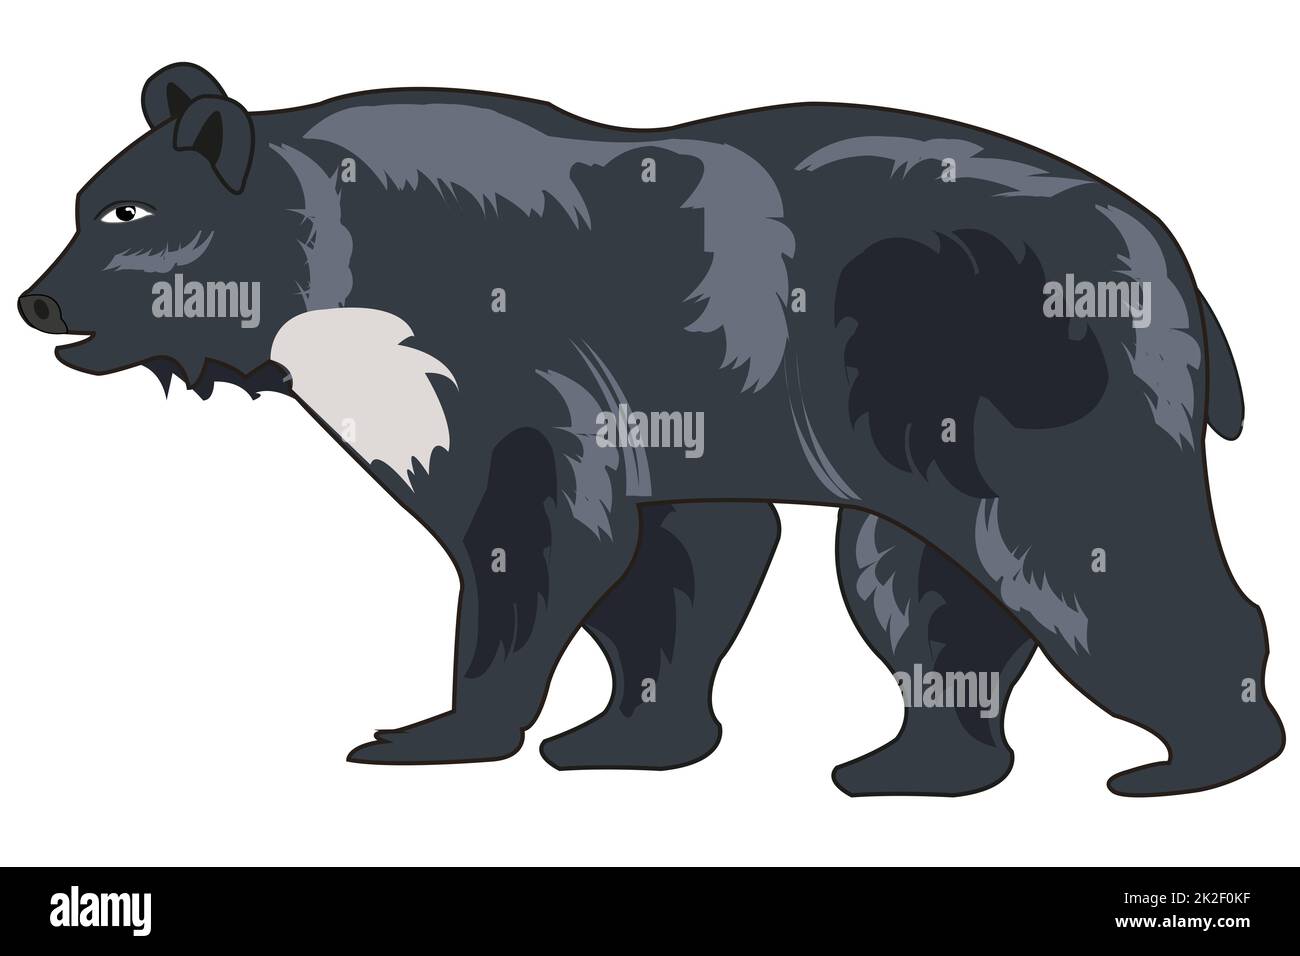 Himalayan bear black on white background is insulated Stock Photo